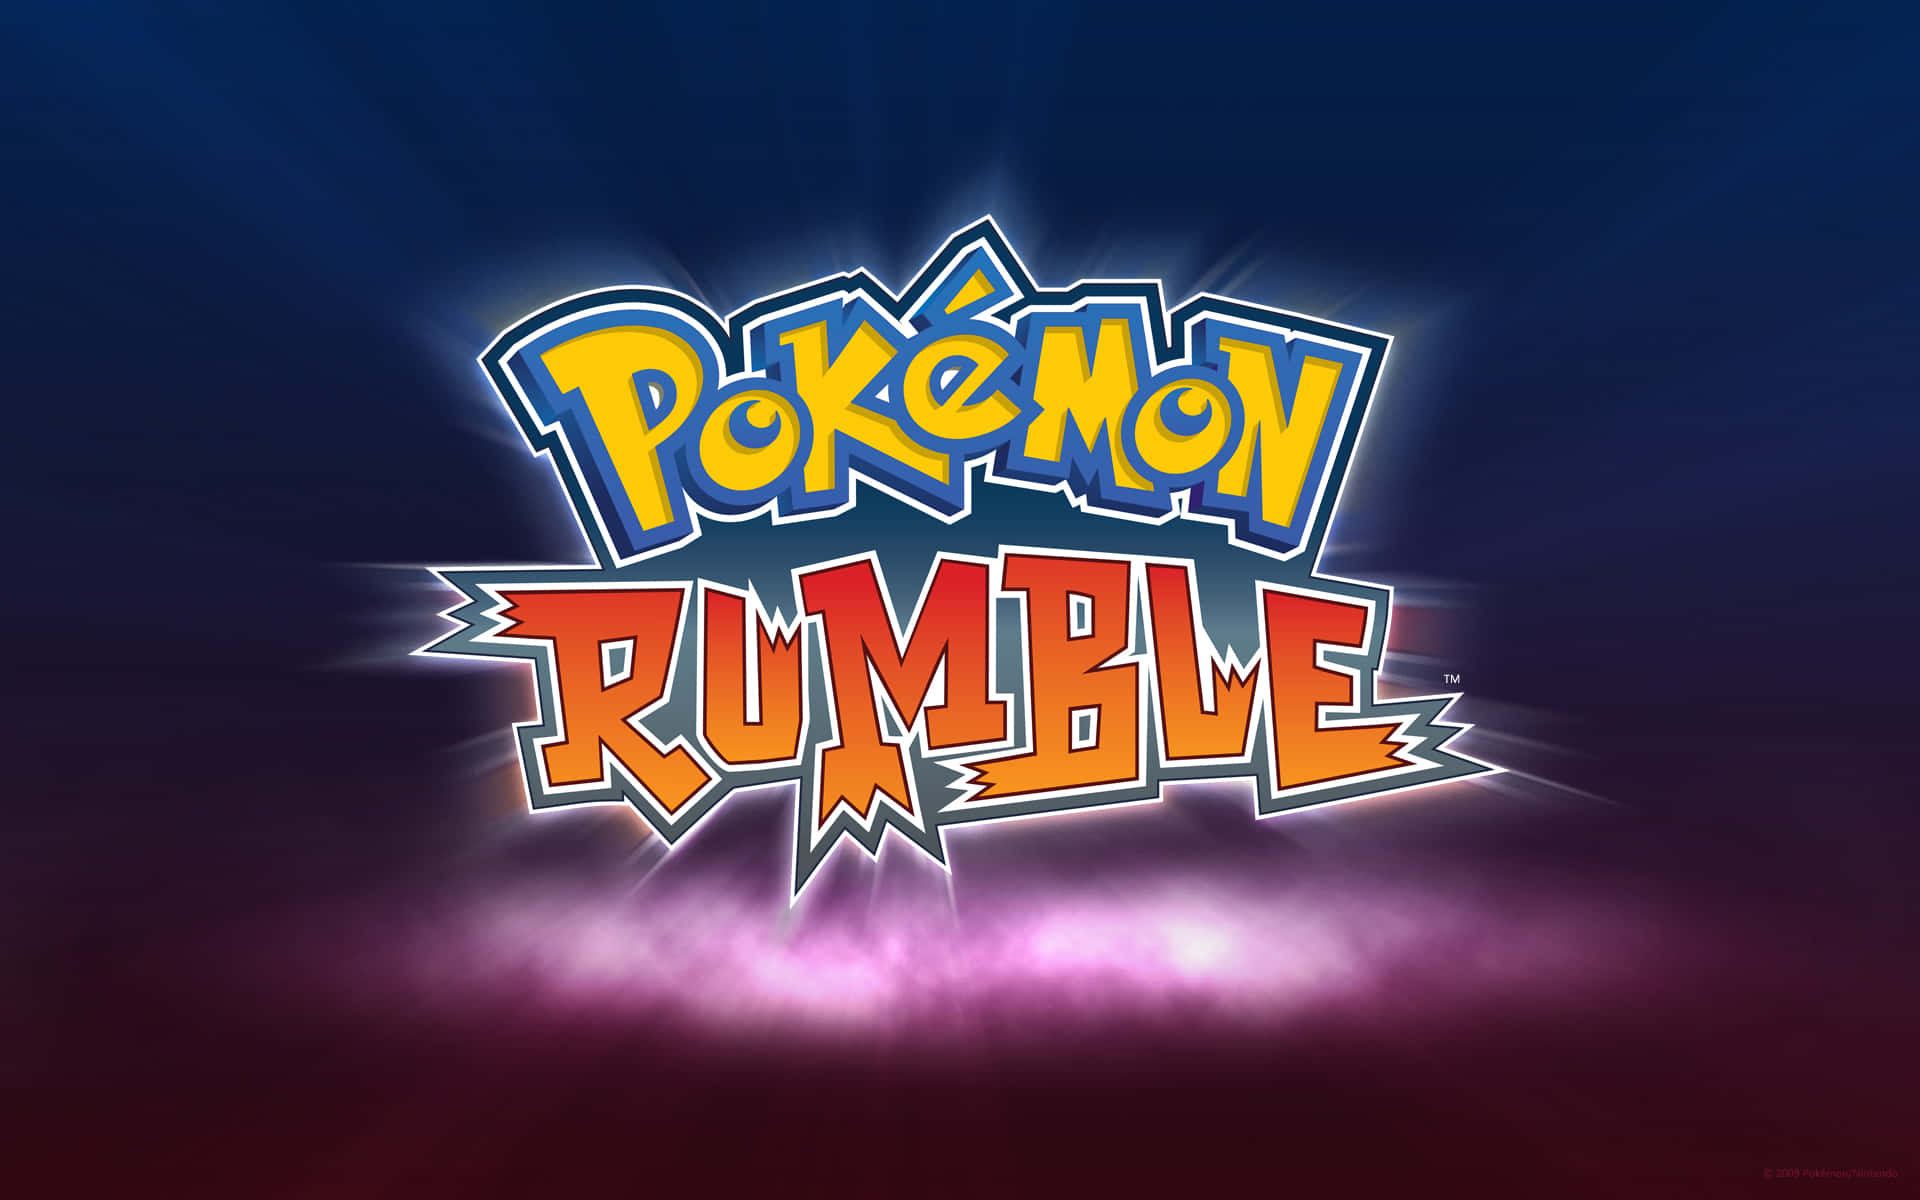 Return to the world of Pokemon Rumble and adventure with your favorite monsters!" Wallpaper